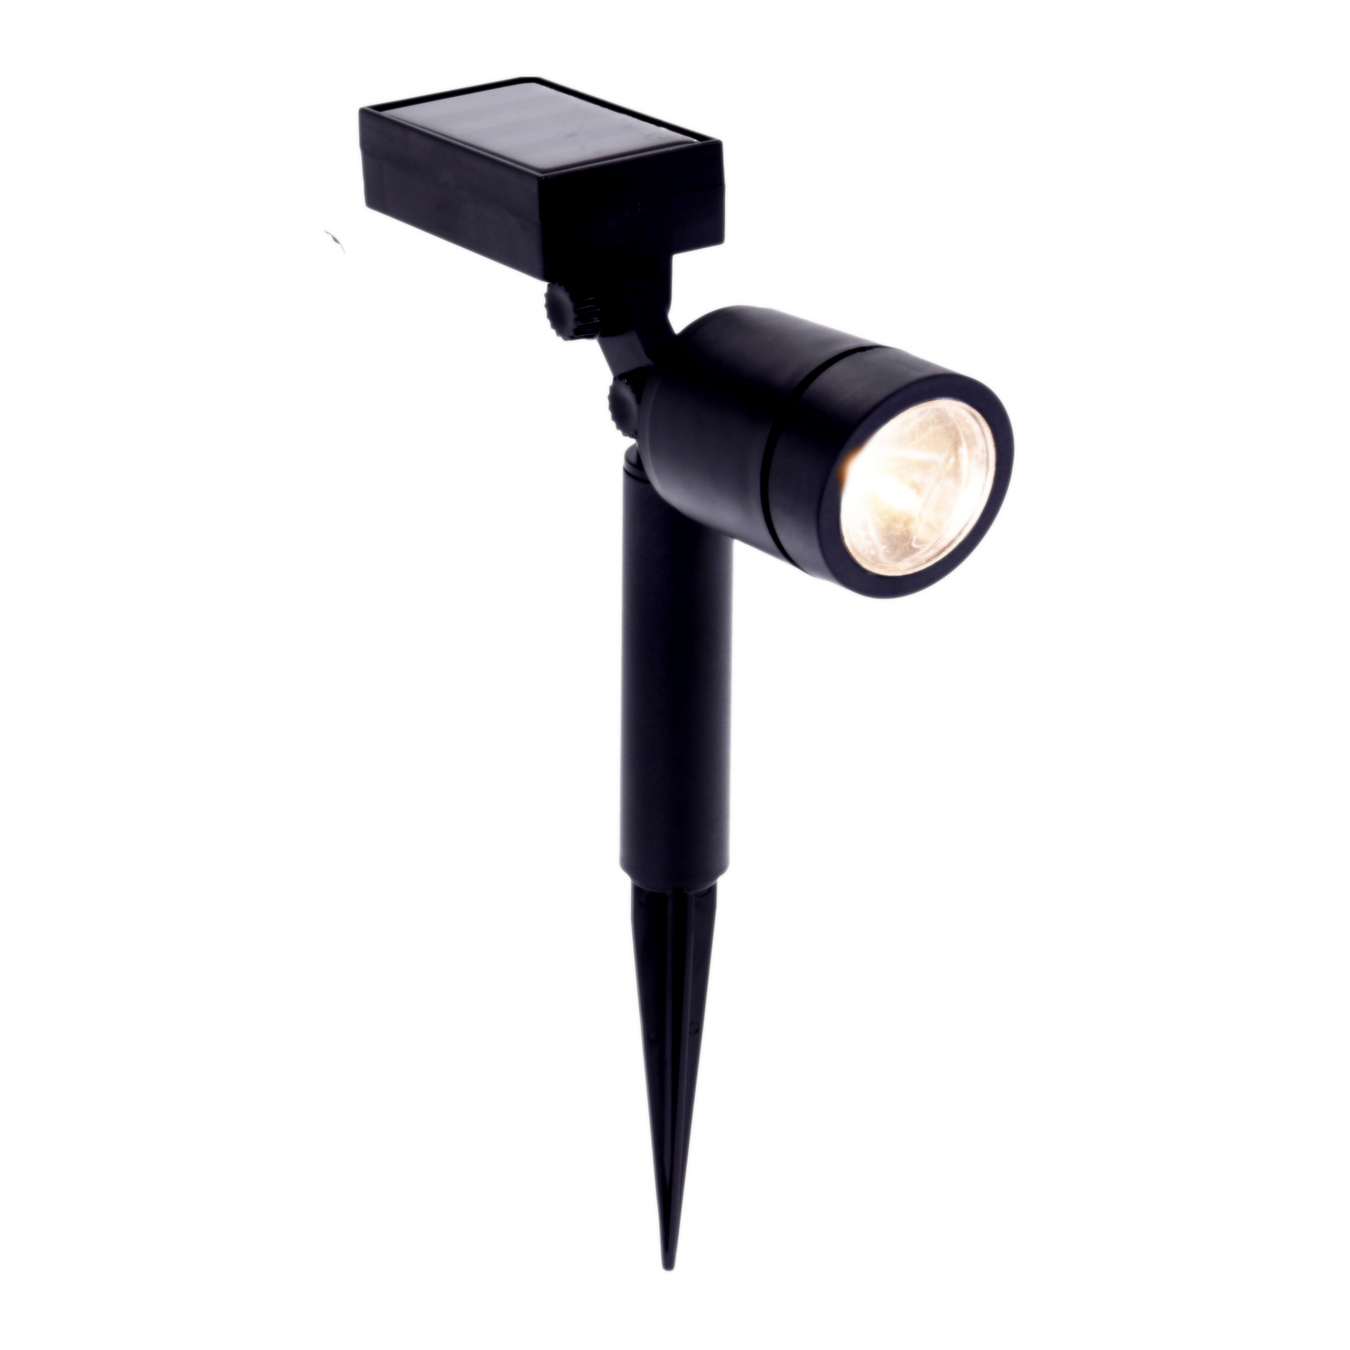 A black illuminated stake garden light with a solar panel on a white background.